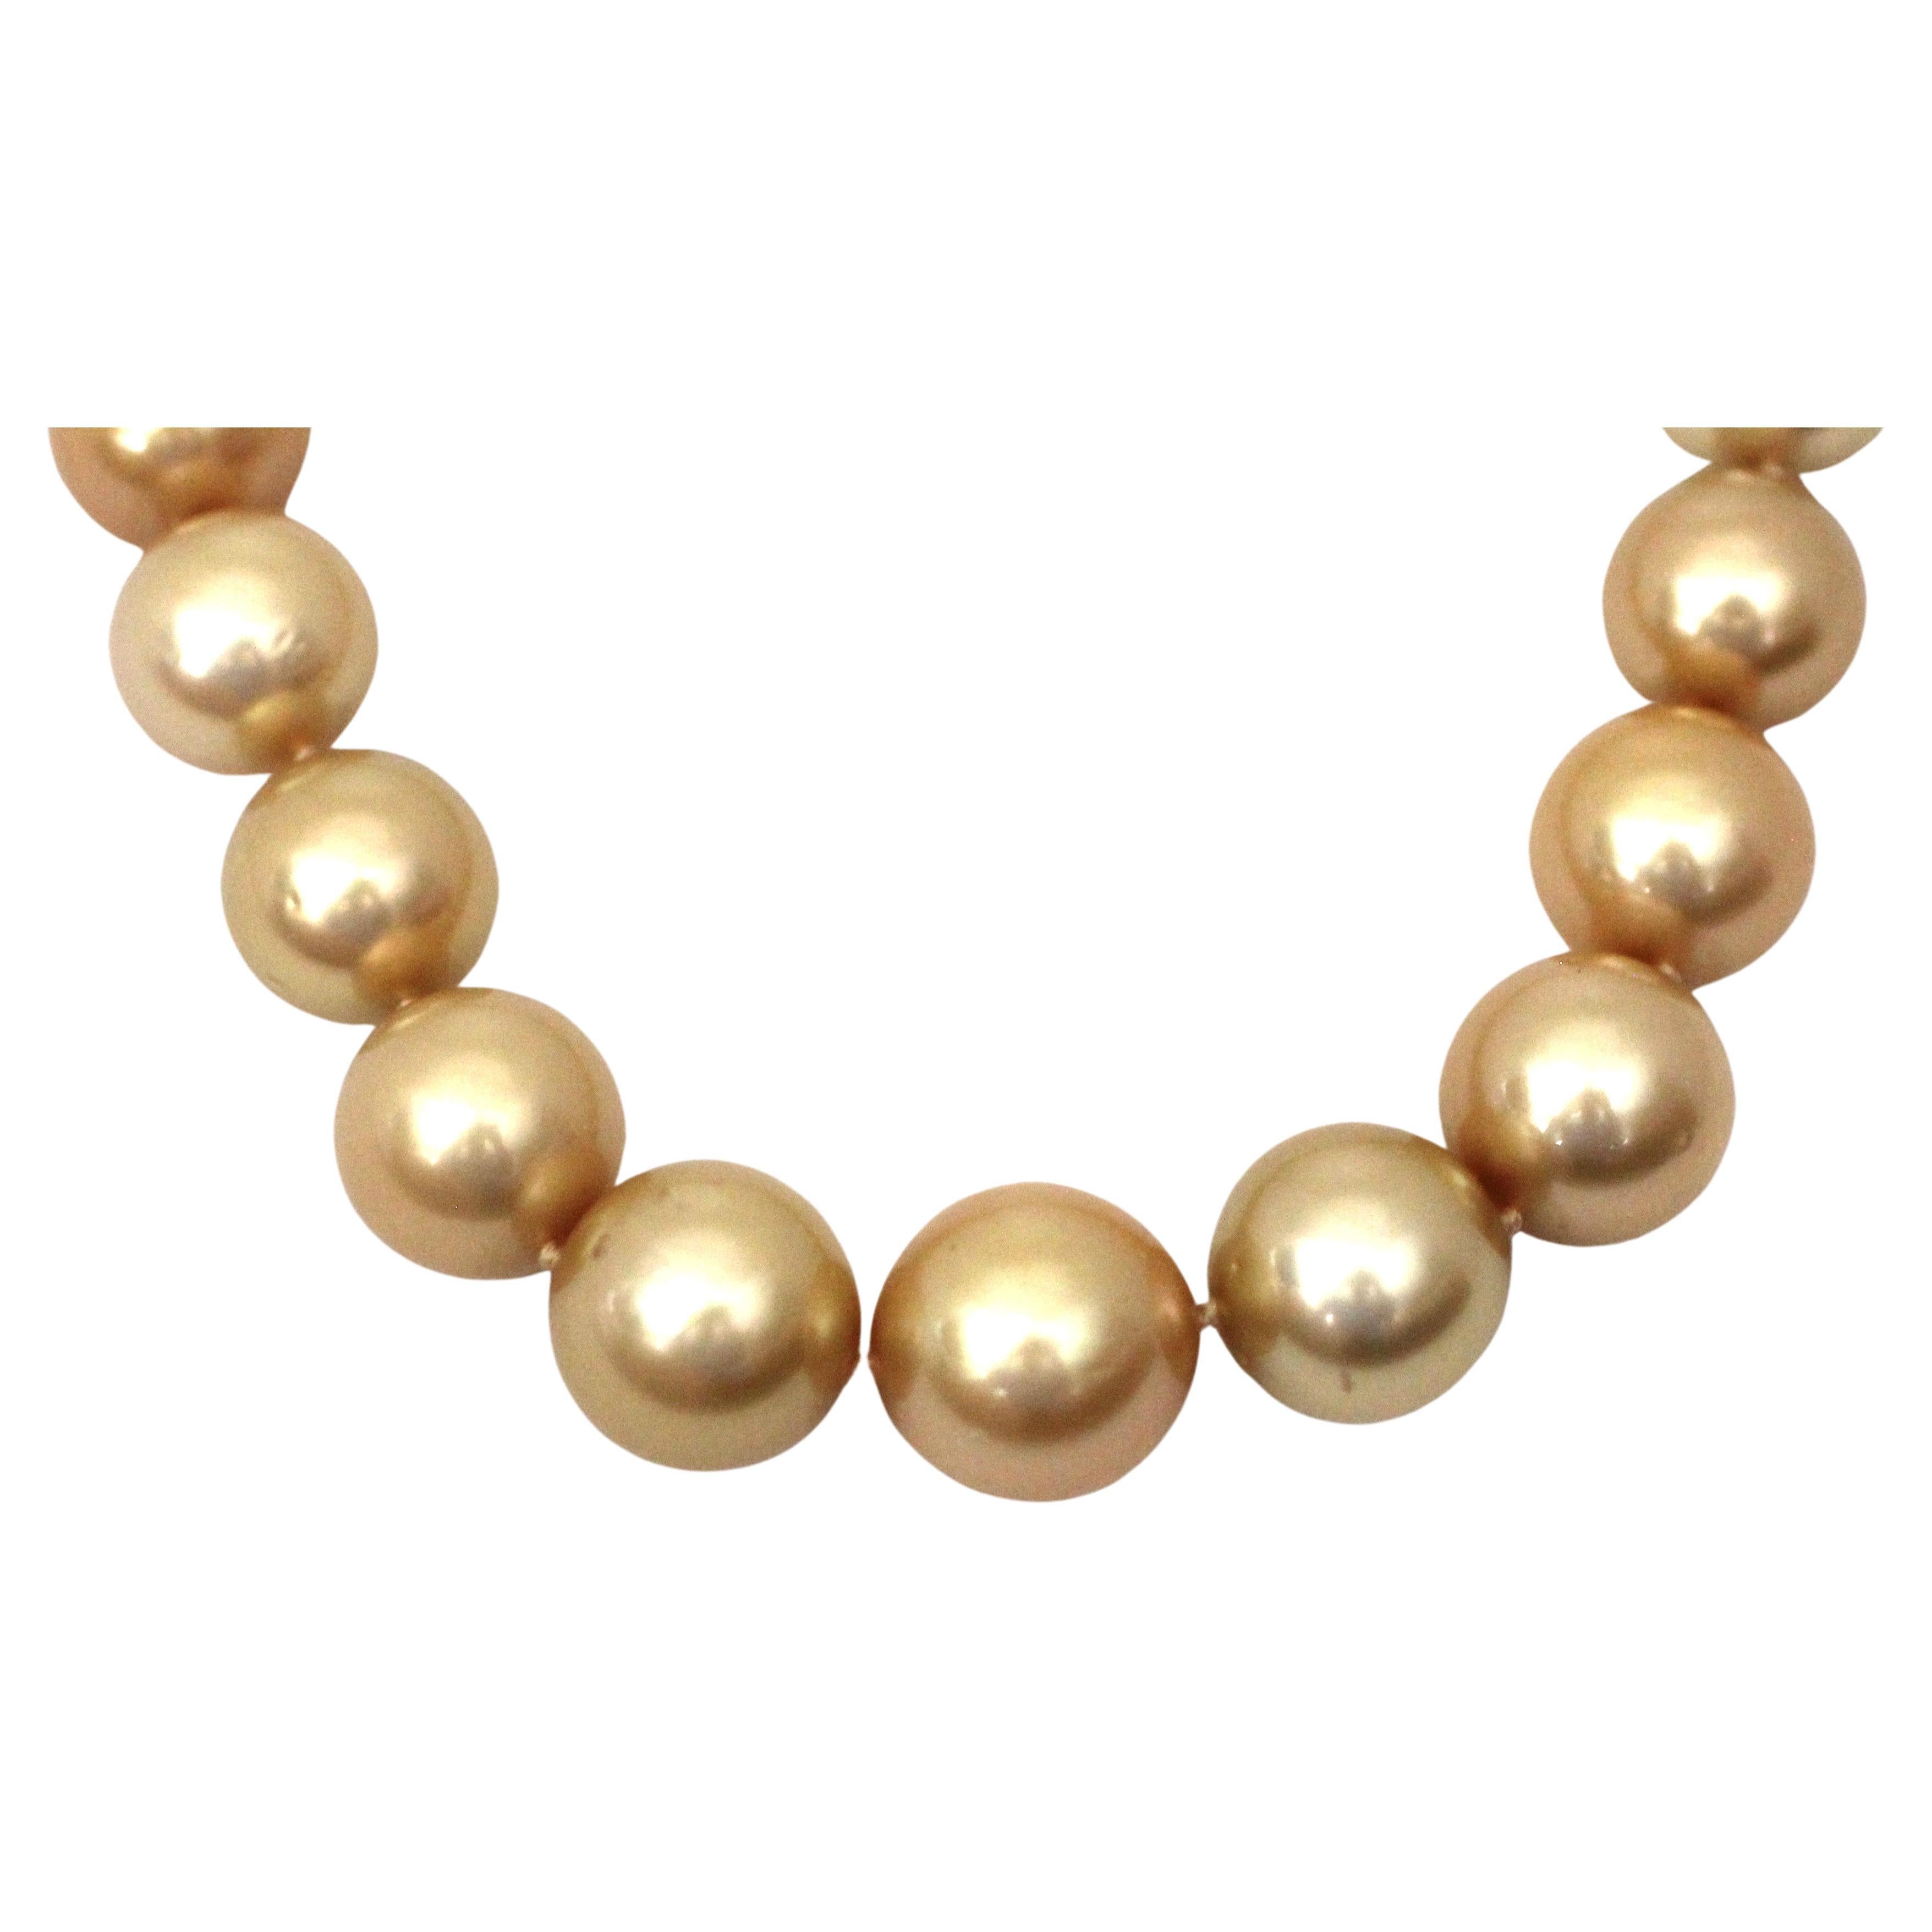 Hakimoto 16x13 mm Natural color Golden South Sea Pearl Necklace